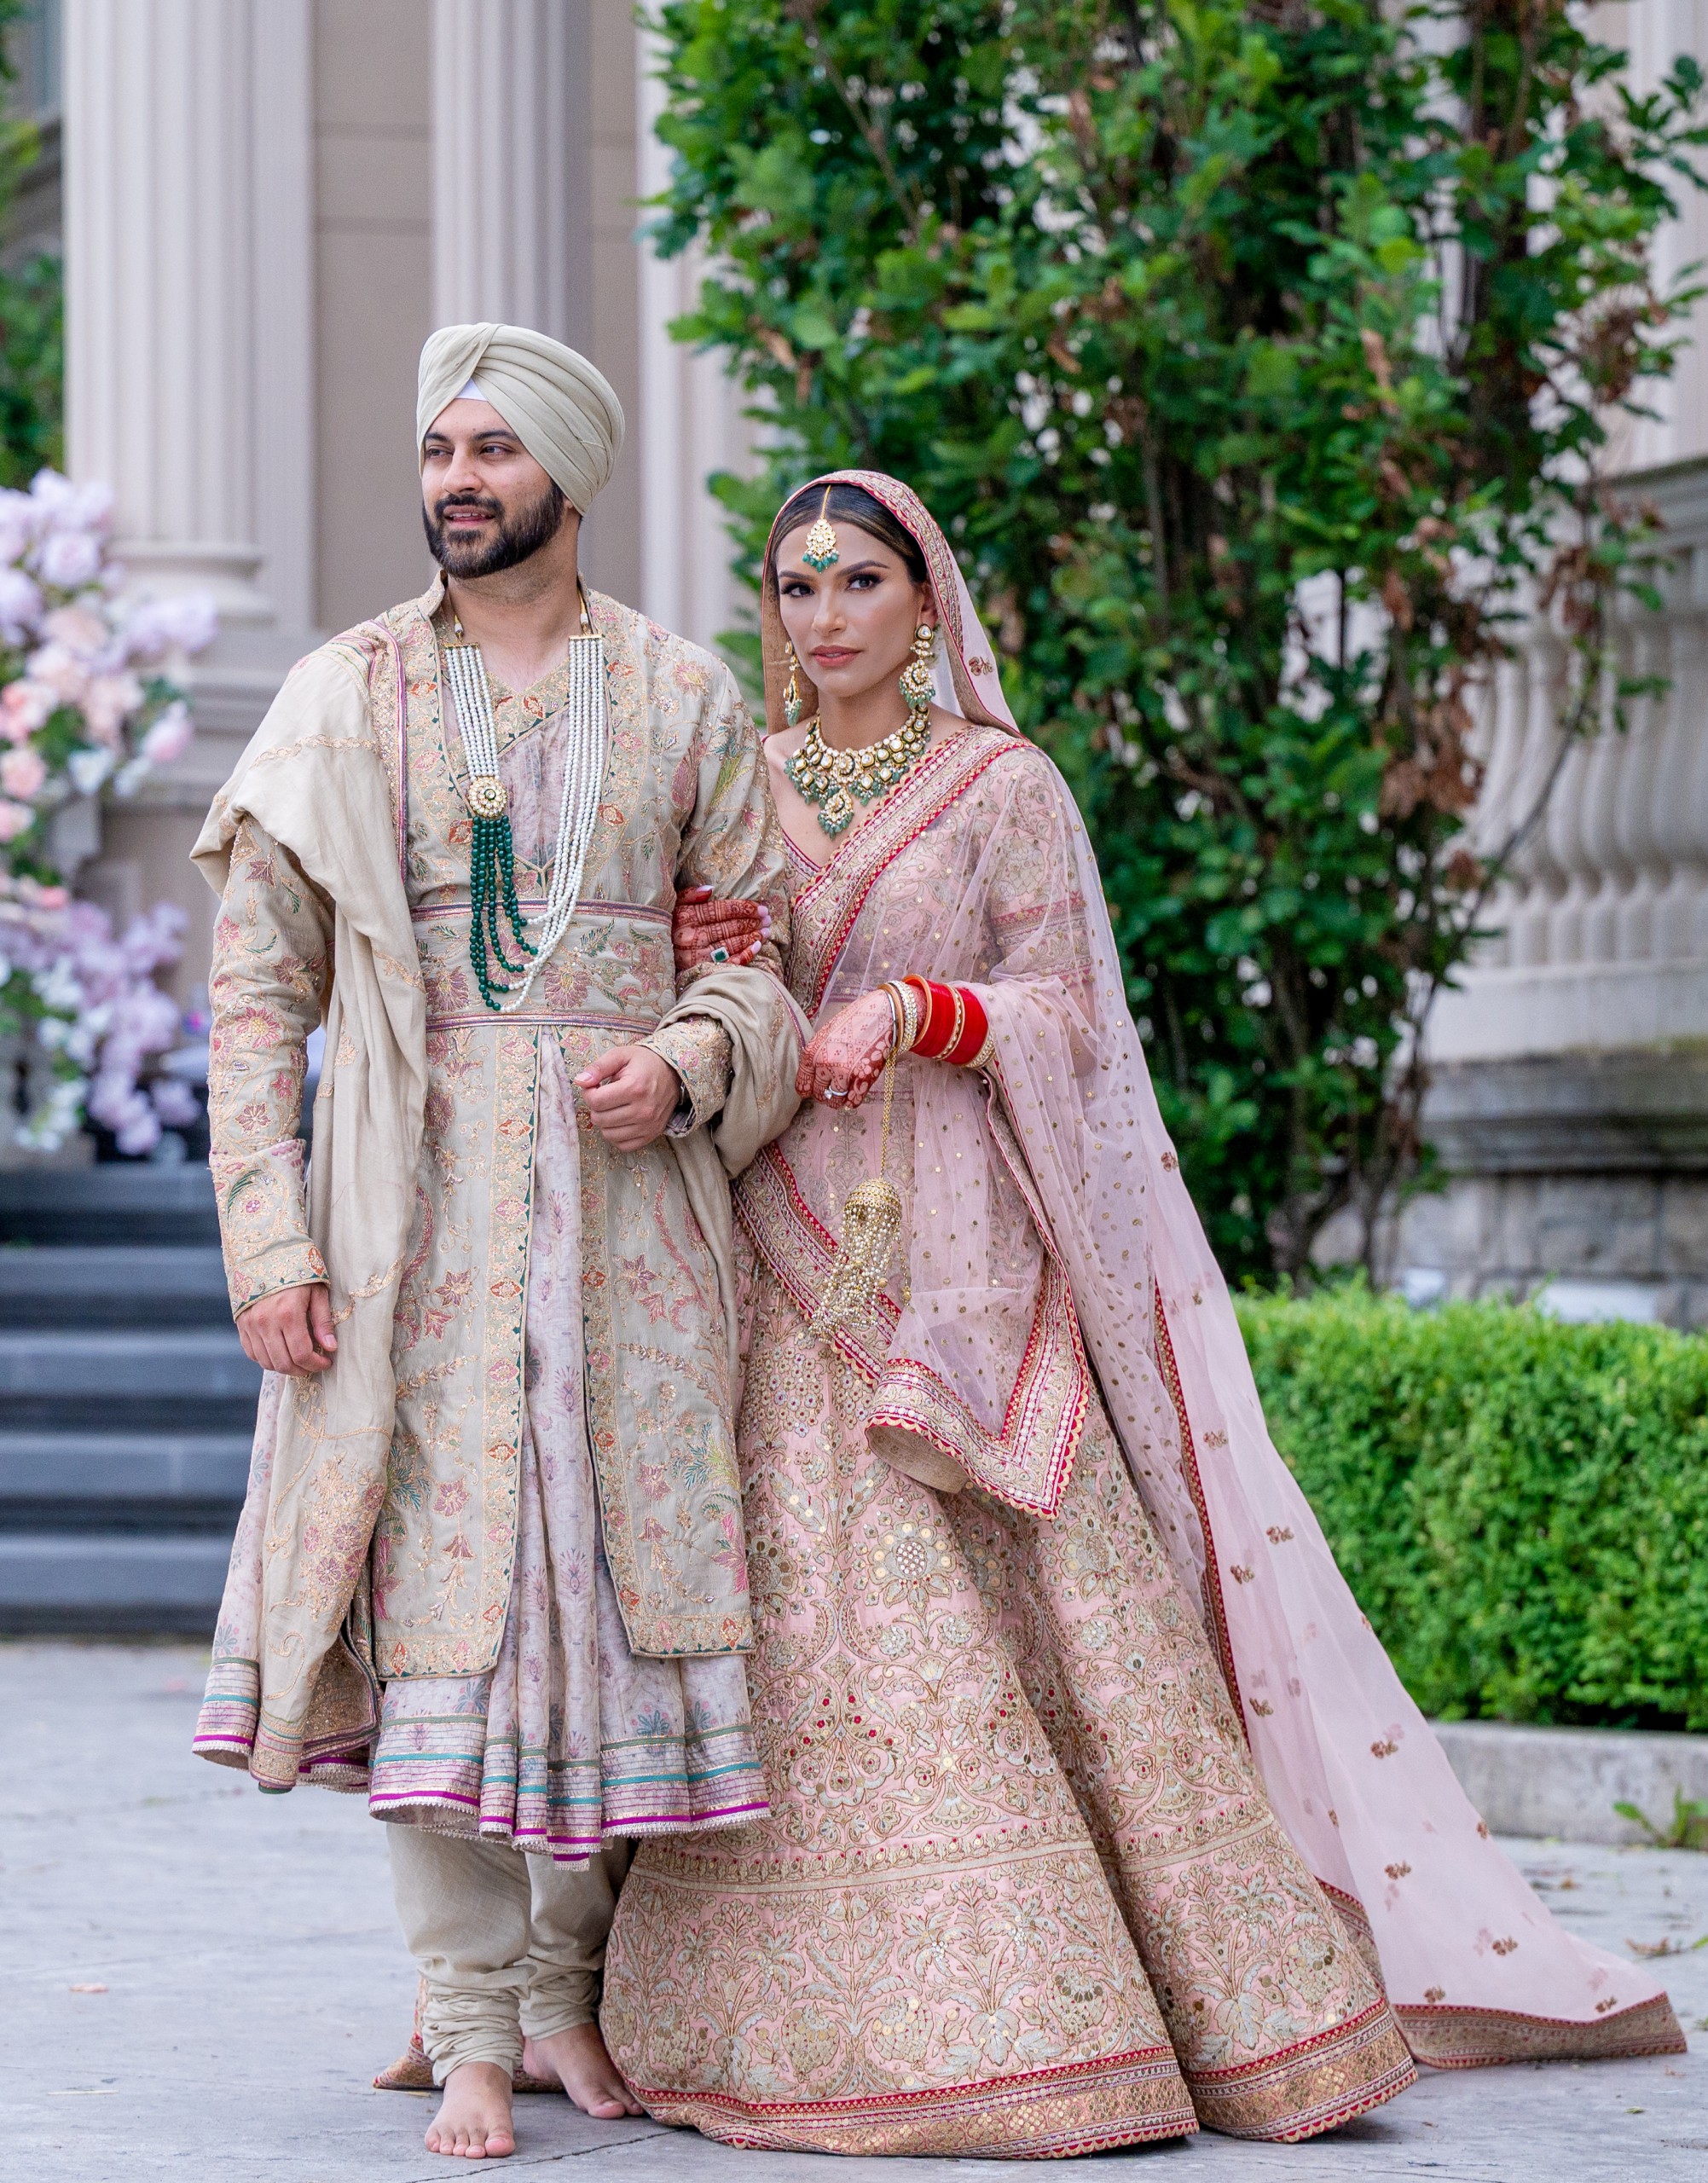 8 Different & Graceful Ways to Coordinate Outfits at Your Wedding |  WeddingBazaar